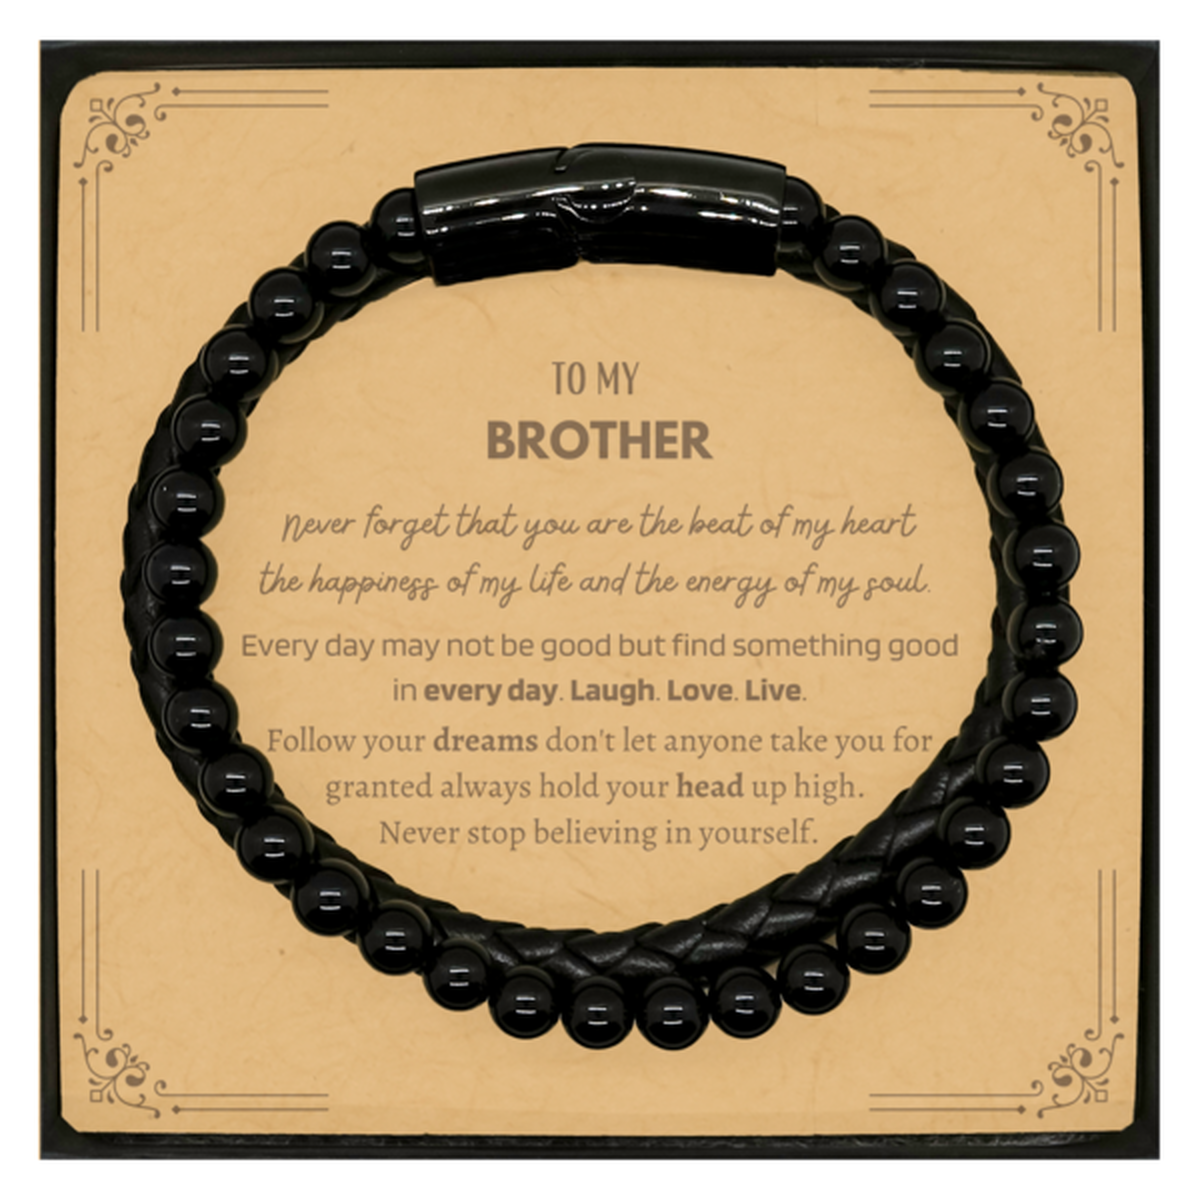 To My Brother Message Card Gifts, Christmas Brother Stone Leather Bracelets Present, Birthday Unique Motivational For Brother, To My Brother Never forget that you are the beat of my heart the happiness of my life and the energy of my soul